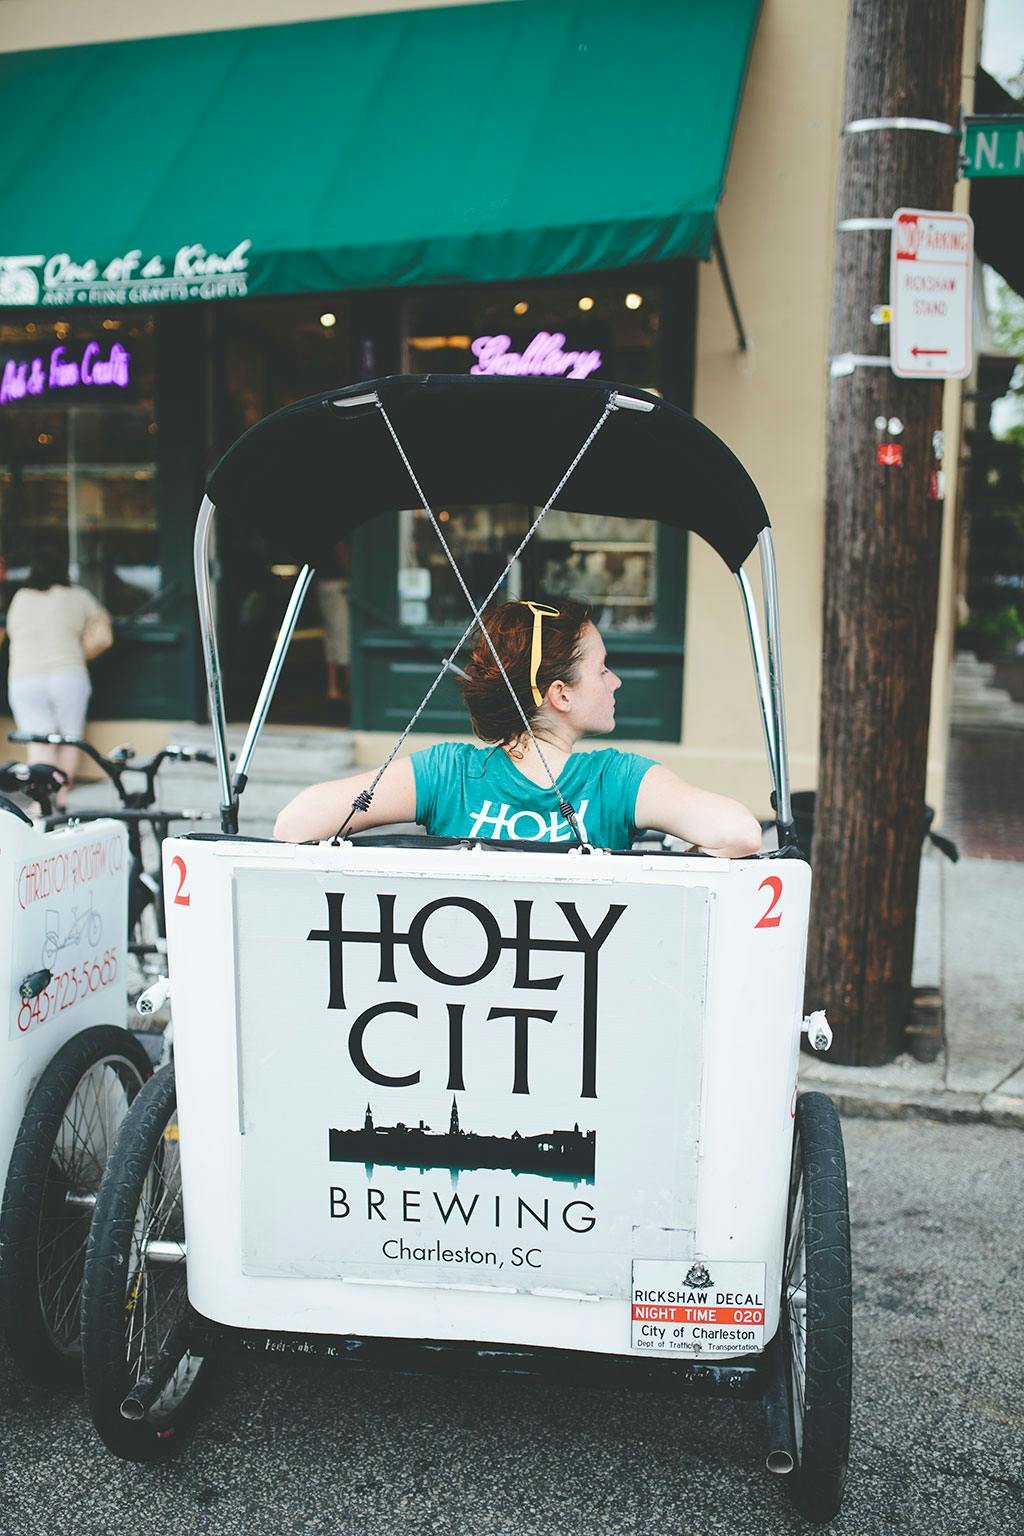 Holy City brewing cab